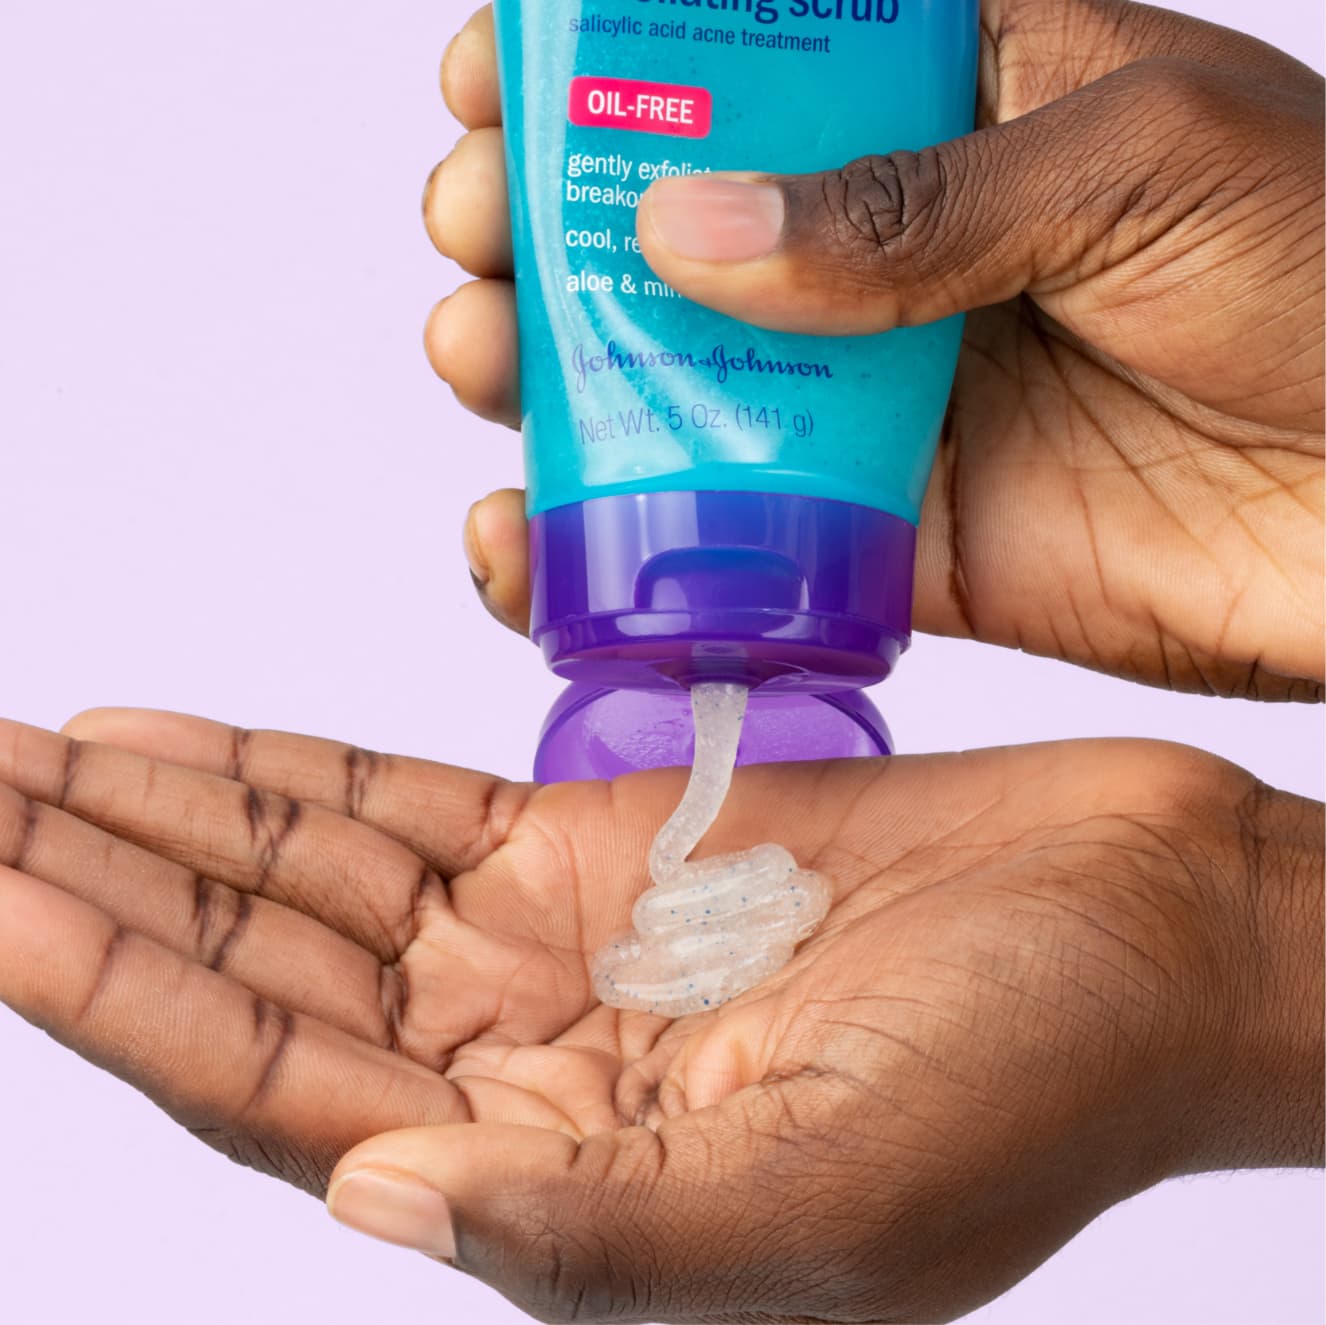 White acne Triple Clear Exfoliating Scrub squeezed in blue bottle with purple cap into palm of hand